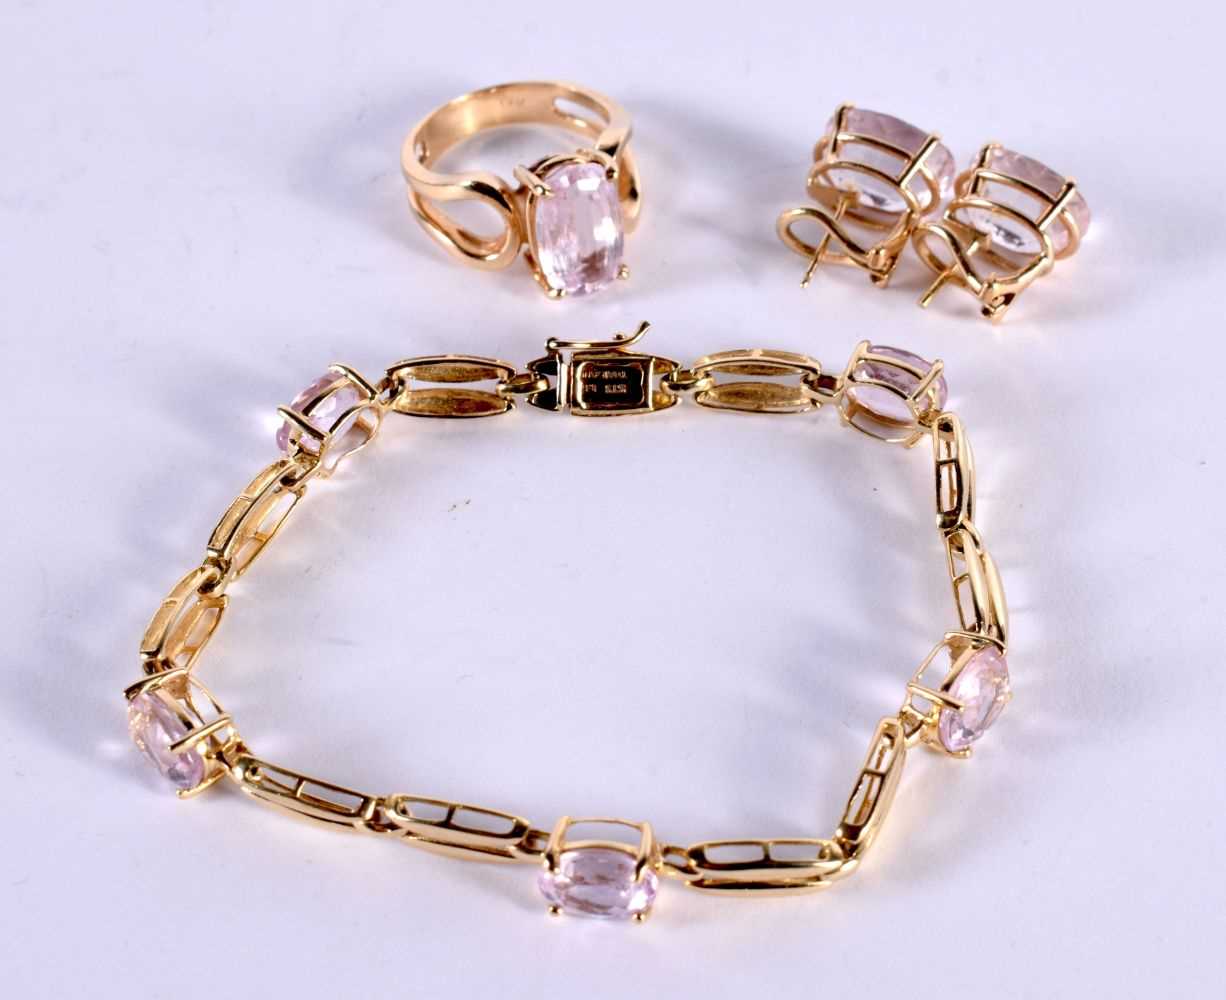 A 14CT GOLD AND GEM SET BRACELET, RING AND EARRINGS. Stamped 14K, Ring Size Q, Bracelet 19 cm - Image 3 of 4